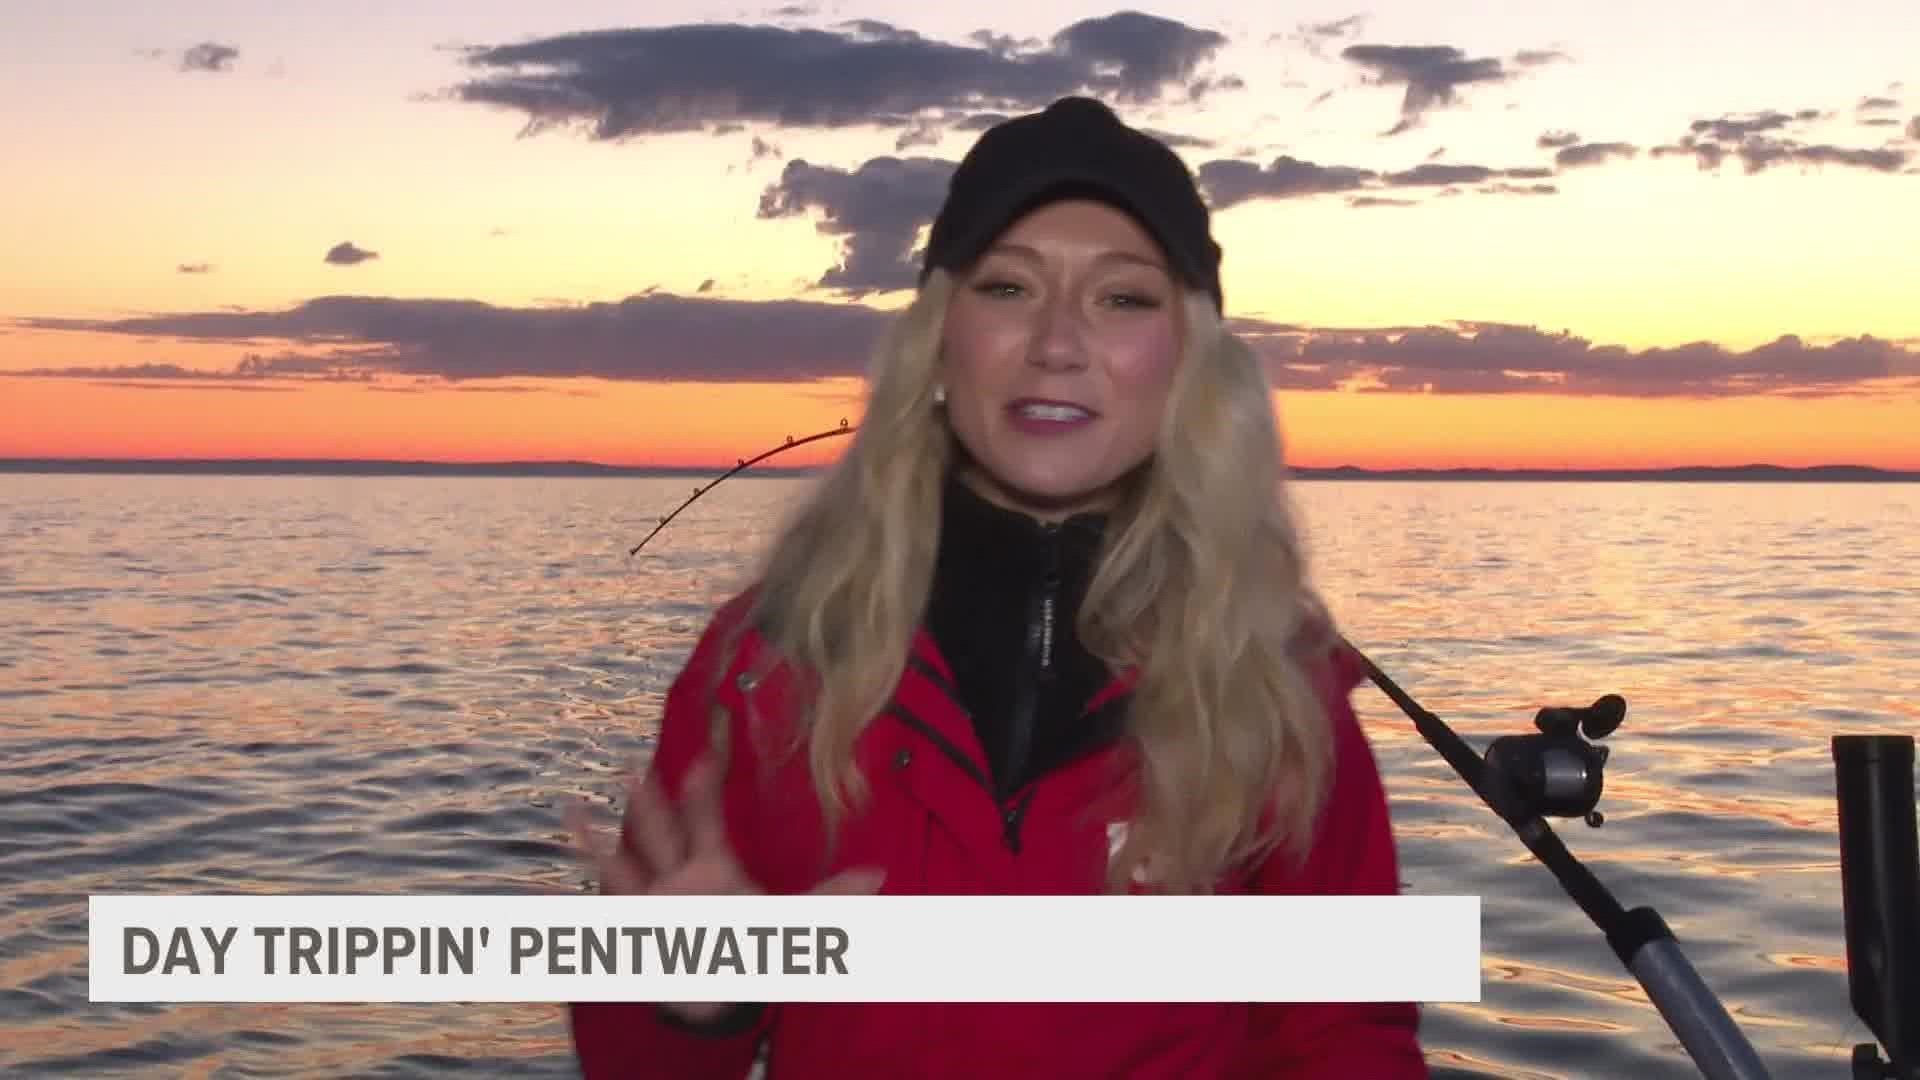 Take a day trip with us to Pentwater, Michigan.